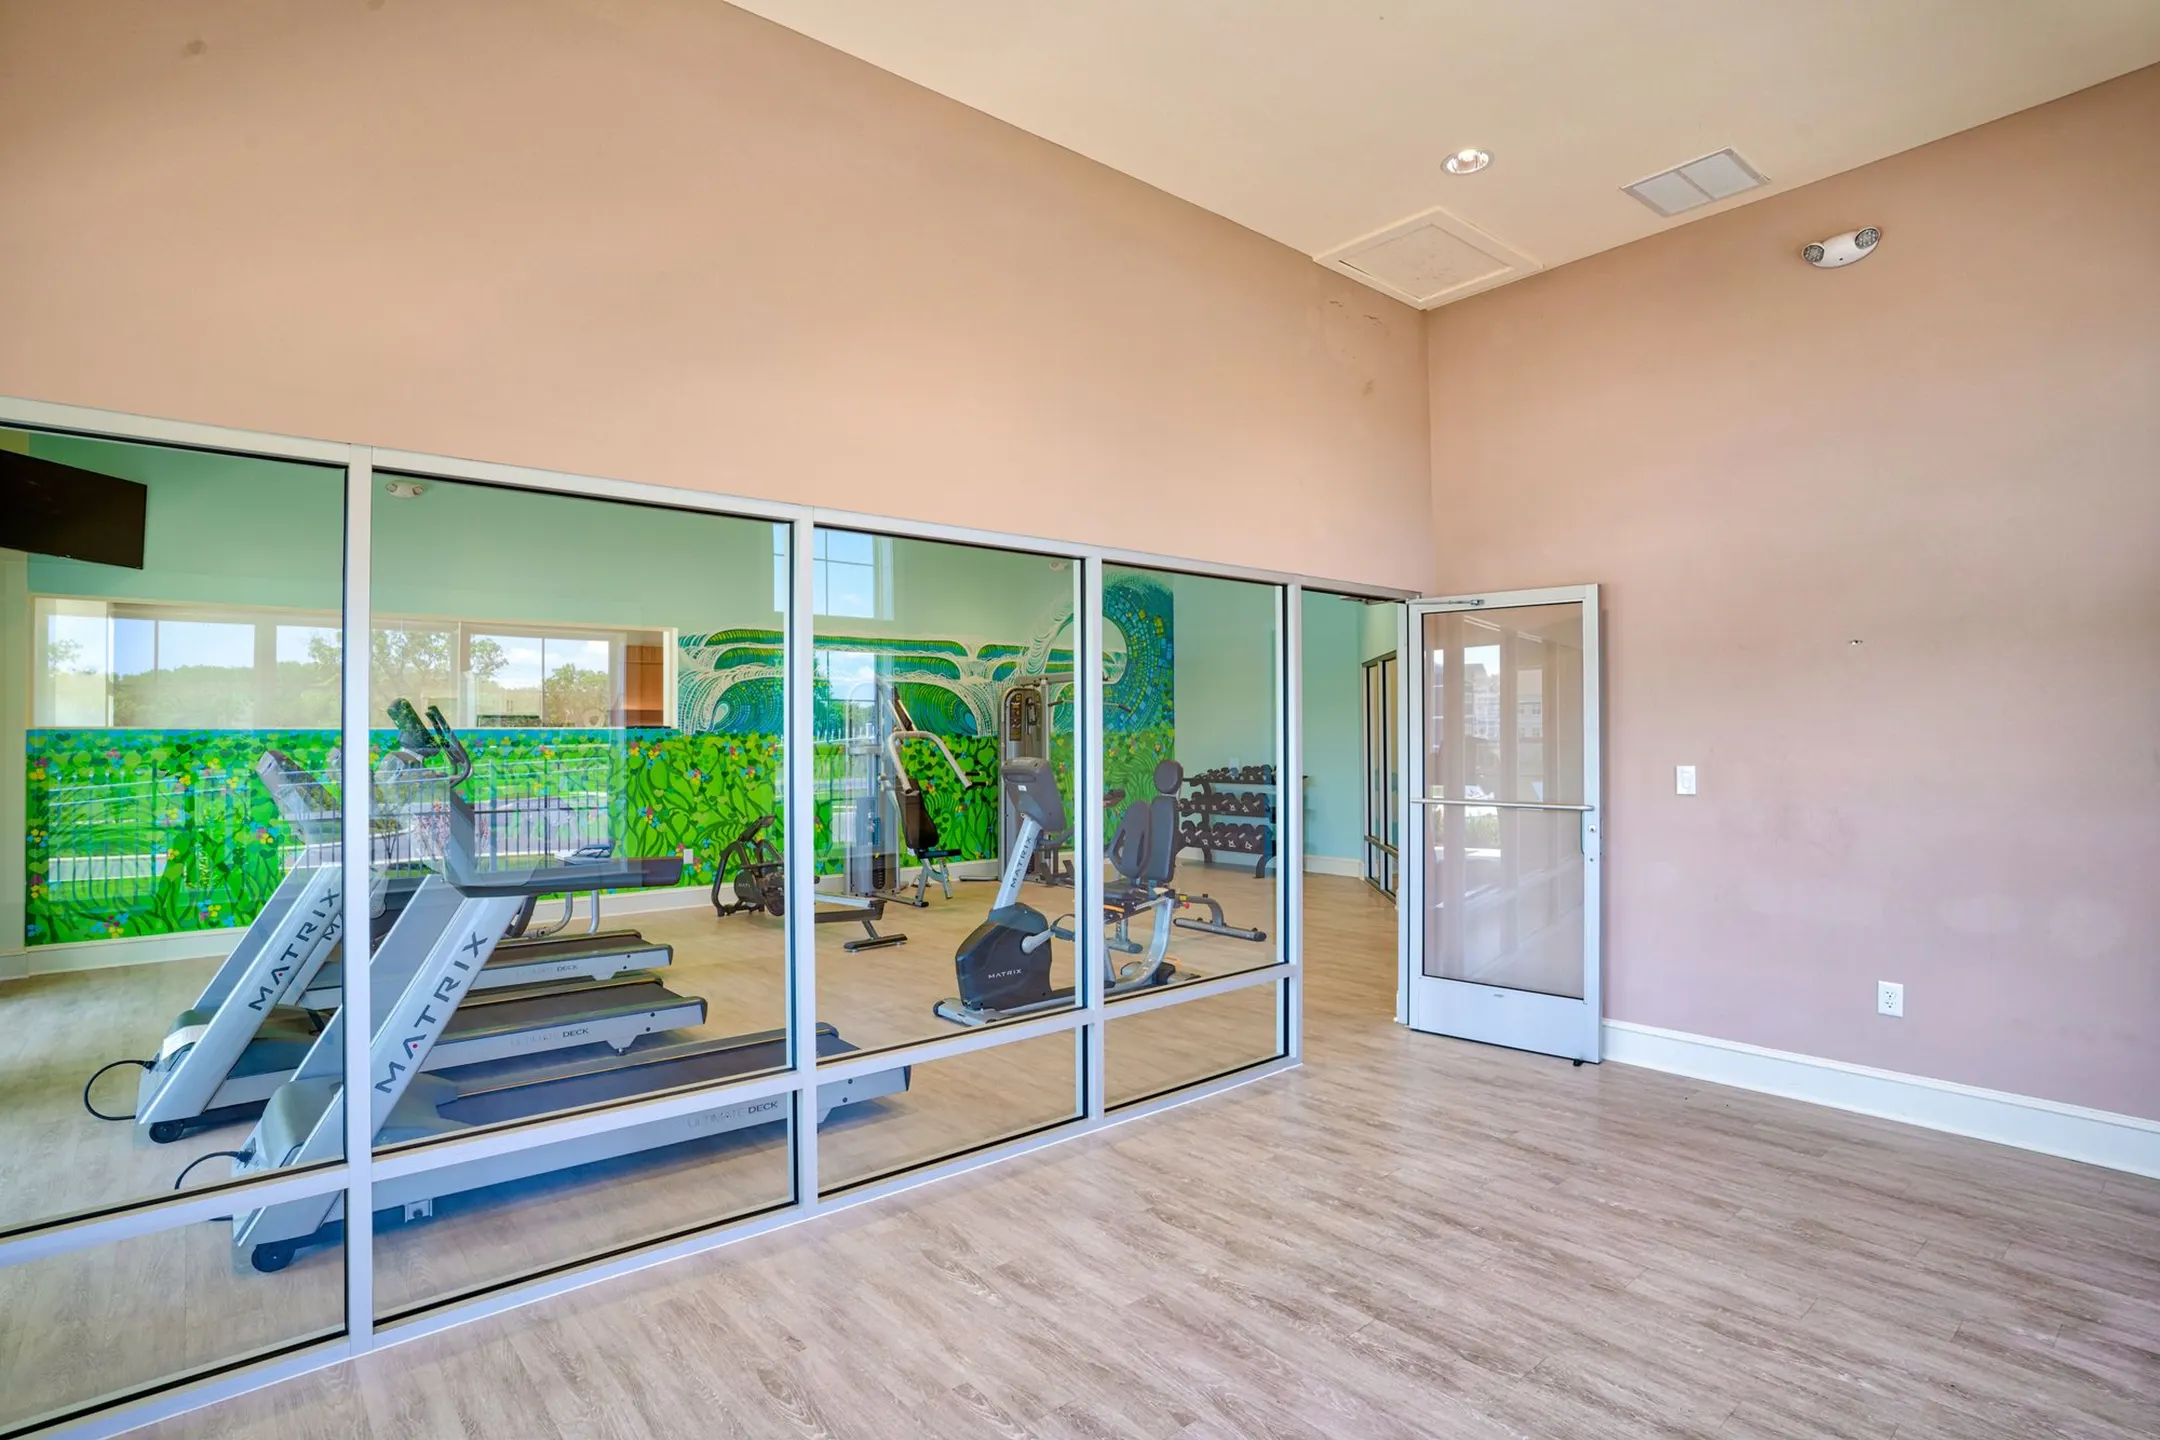 Fitness Weight Room - Oceans East Luxury Apartment Homes - Berlin, MD